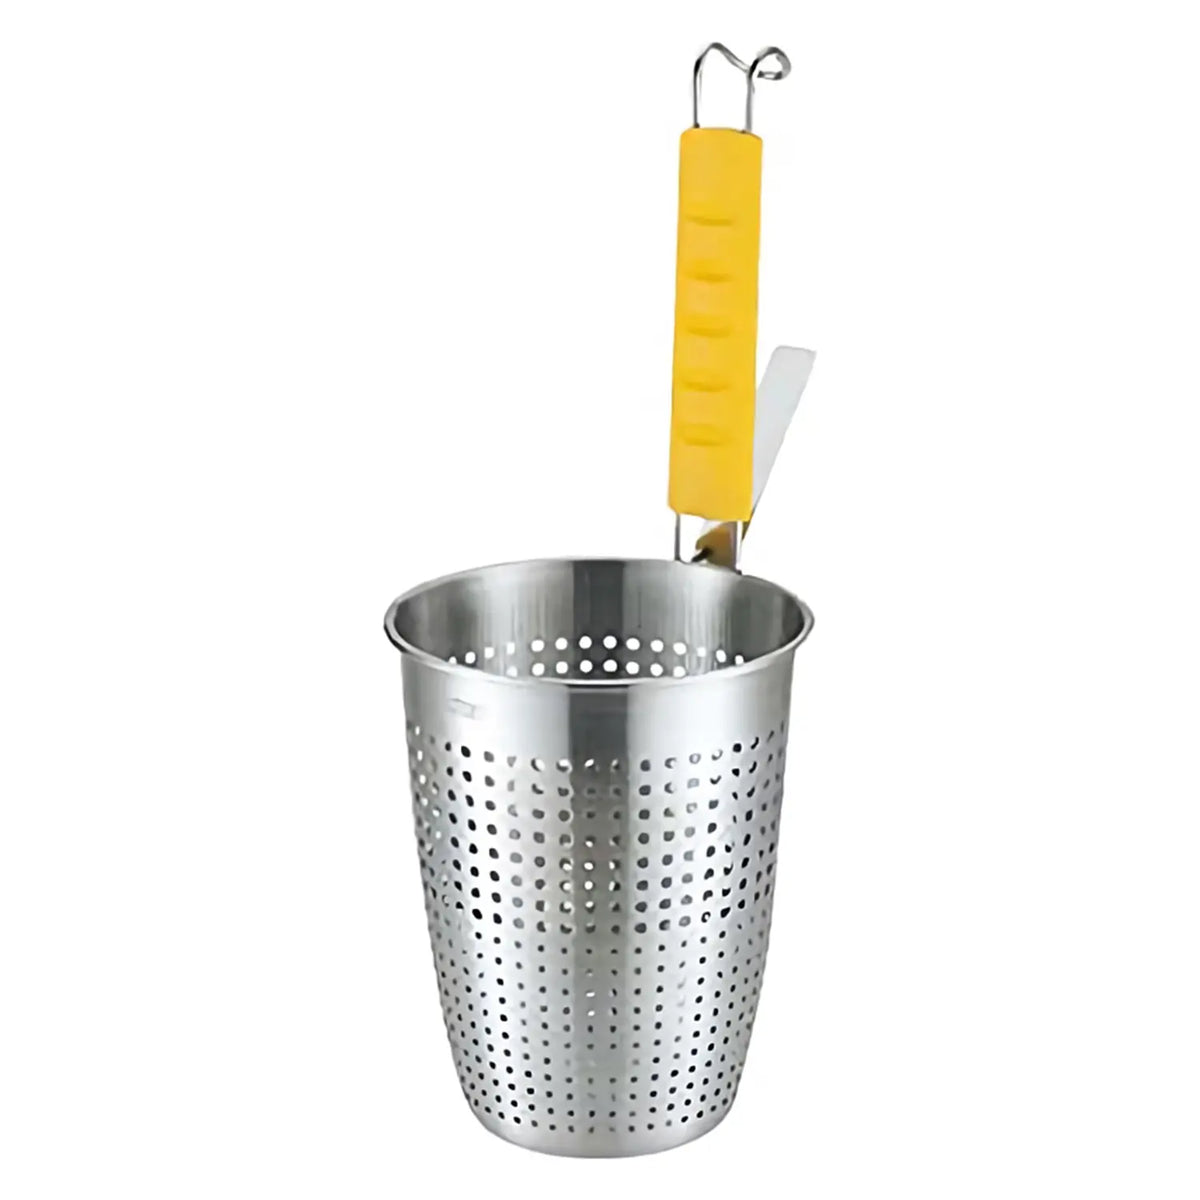 YUKIWA Stainless Steel Tebo Noodle Strainer with Silicone Handle